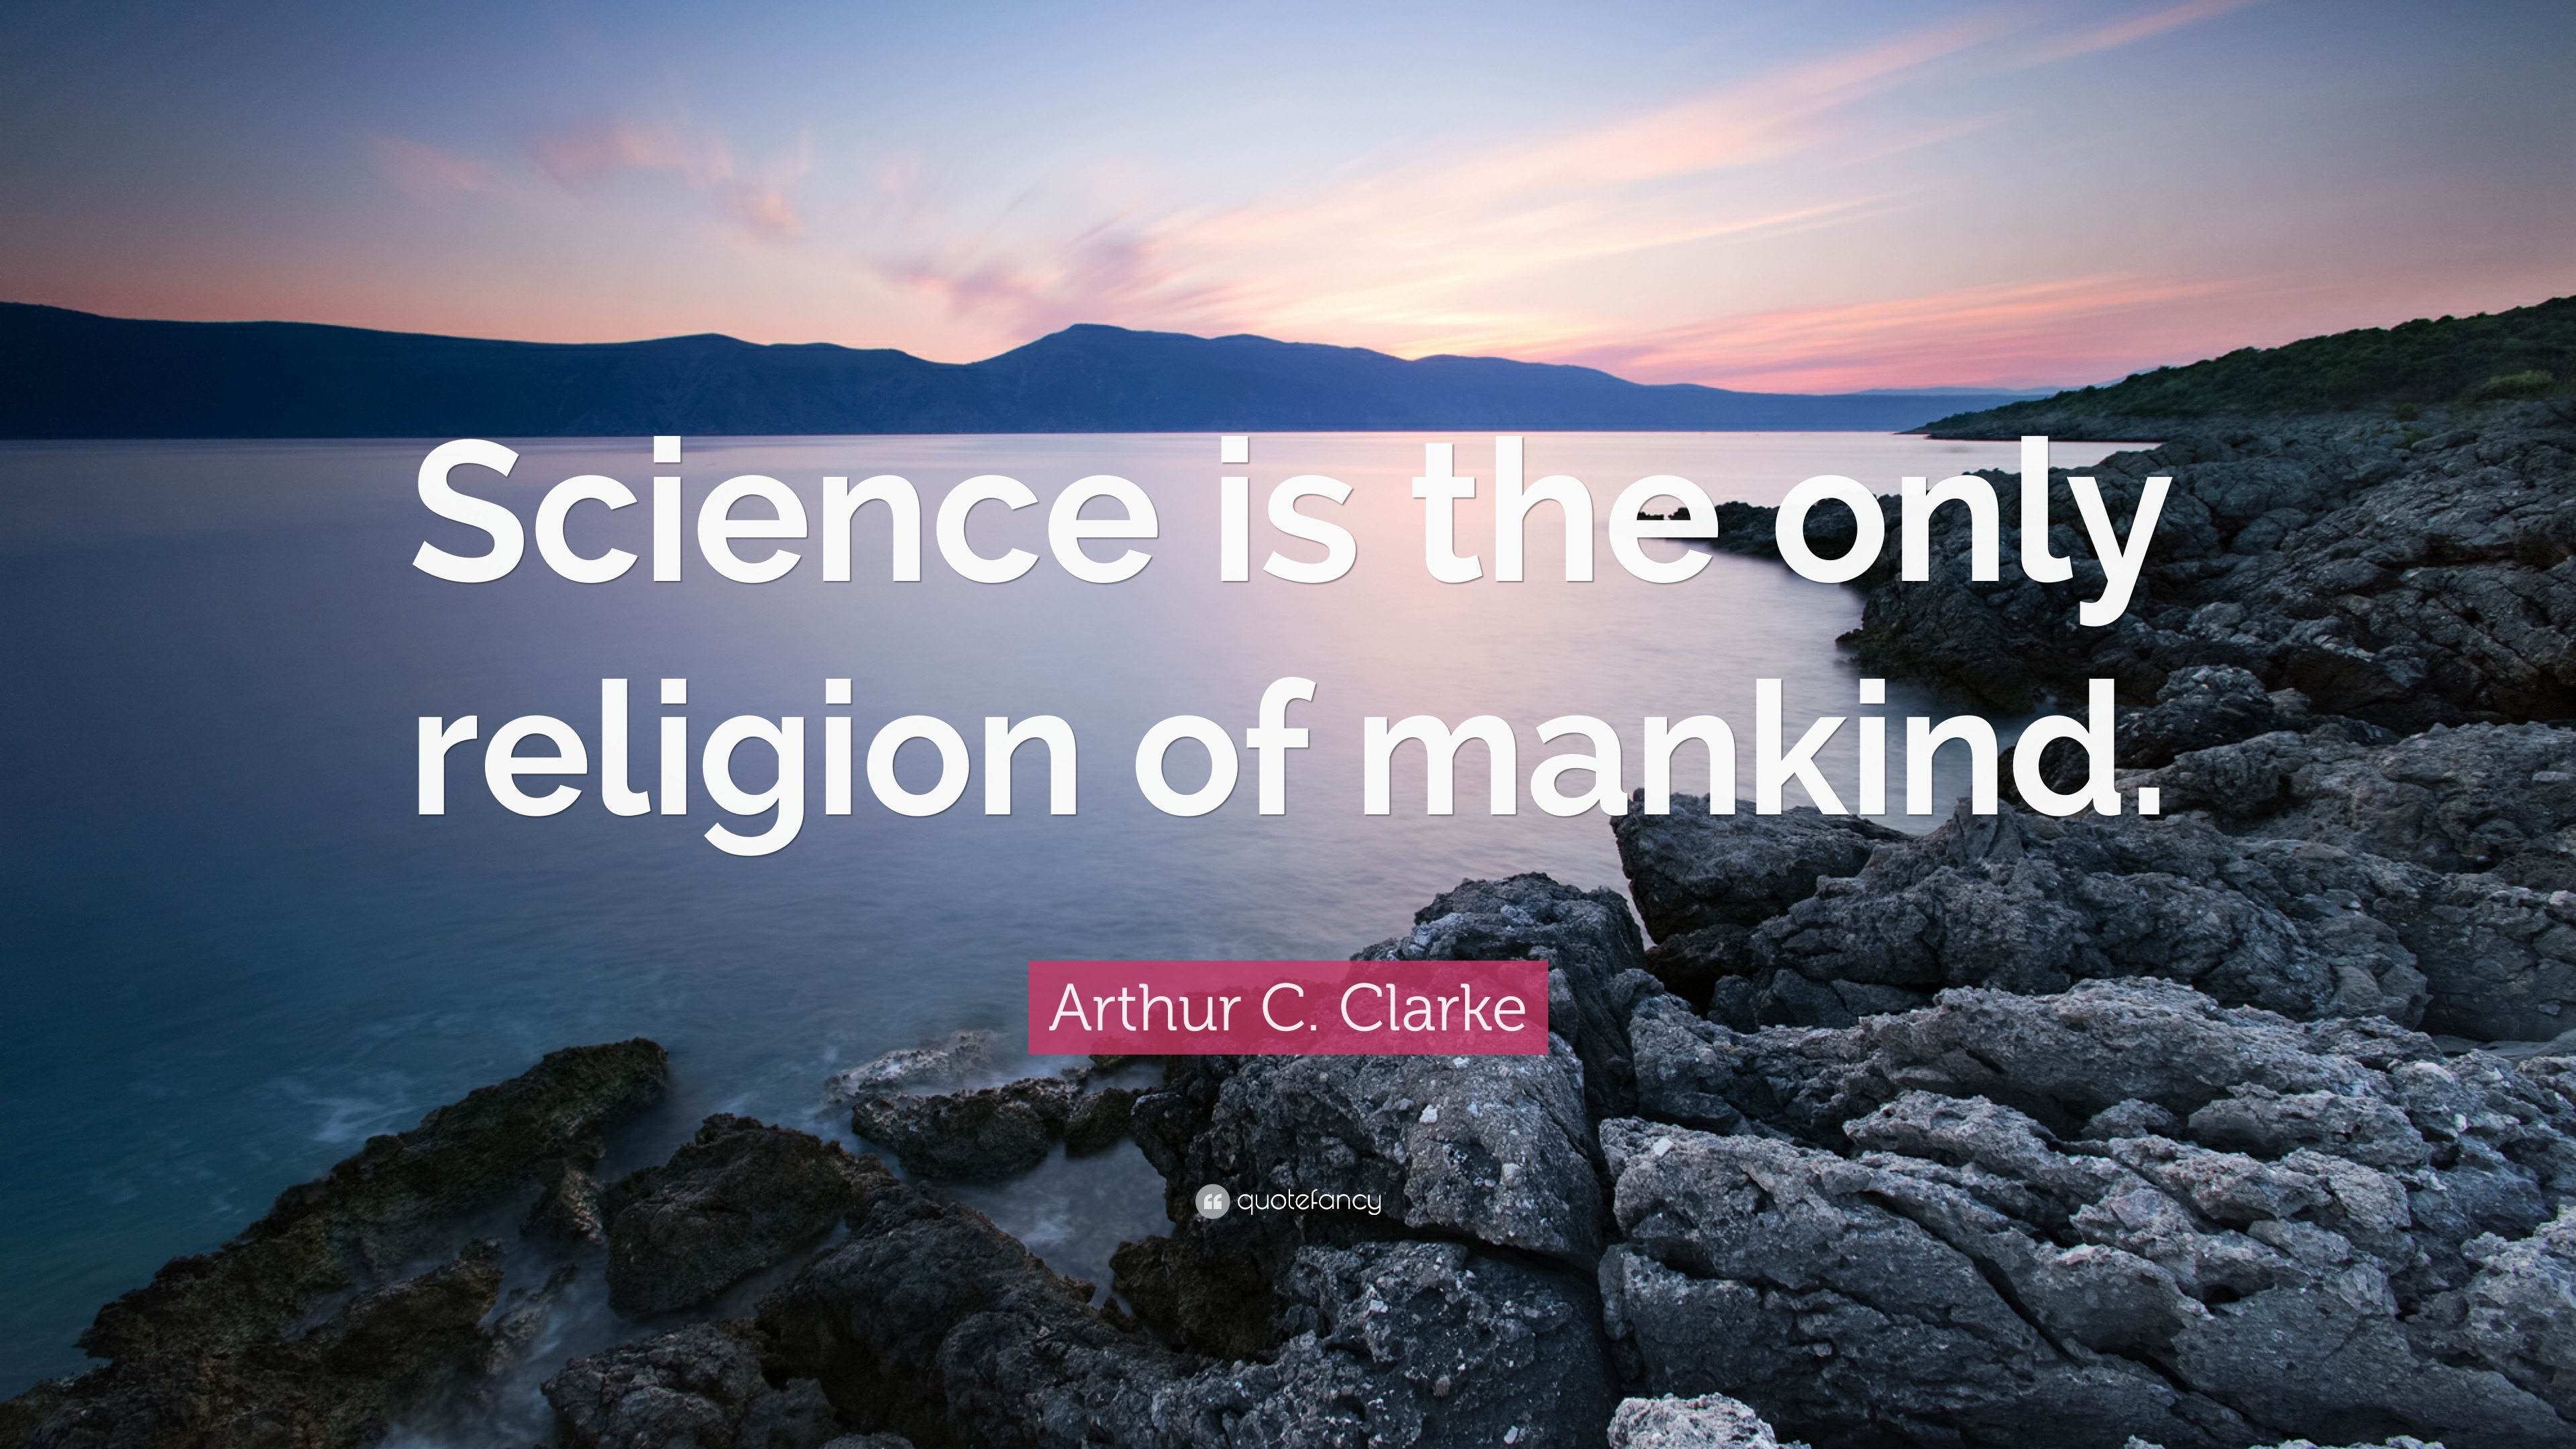 Arthur C. Clarke Quote “Science is the only religion of mankind.” (12